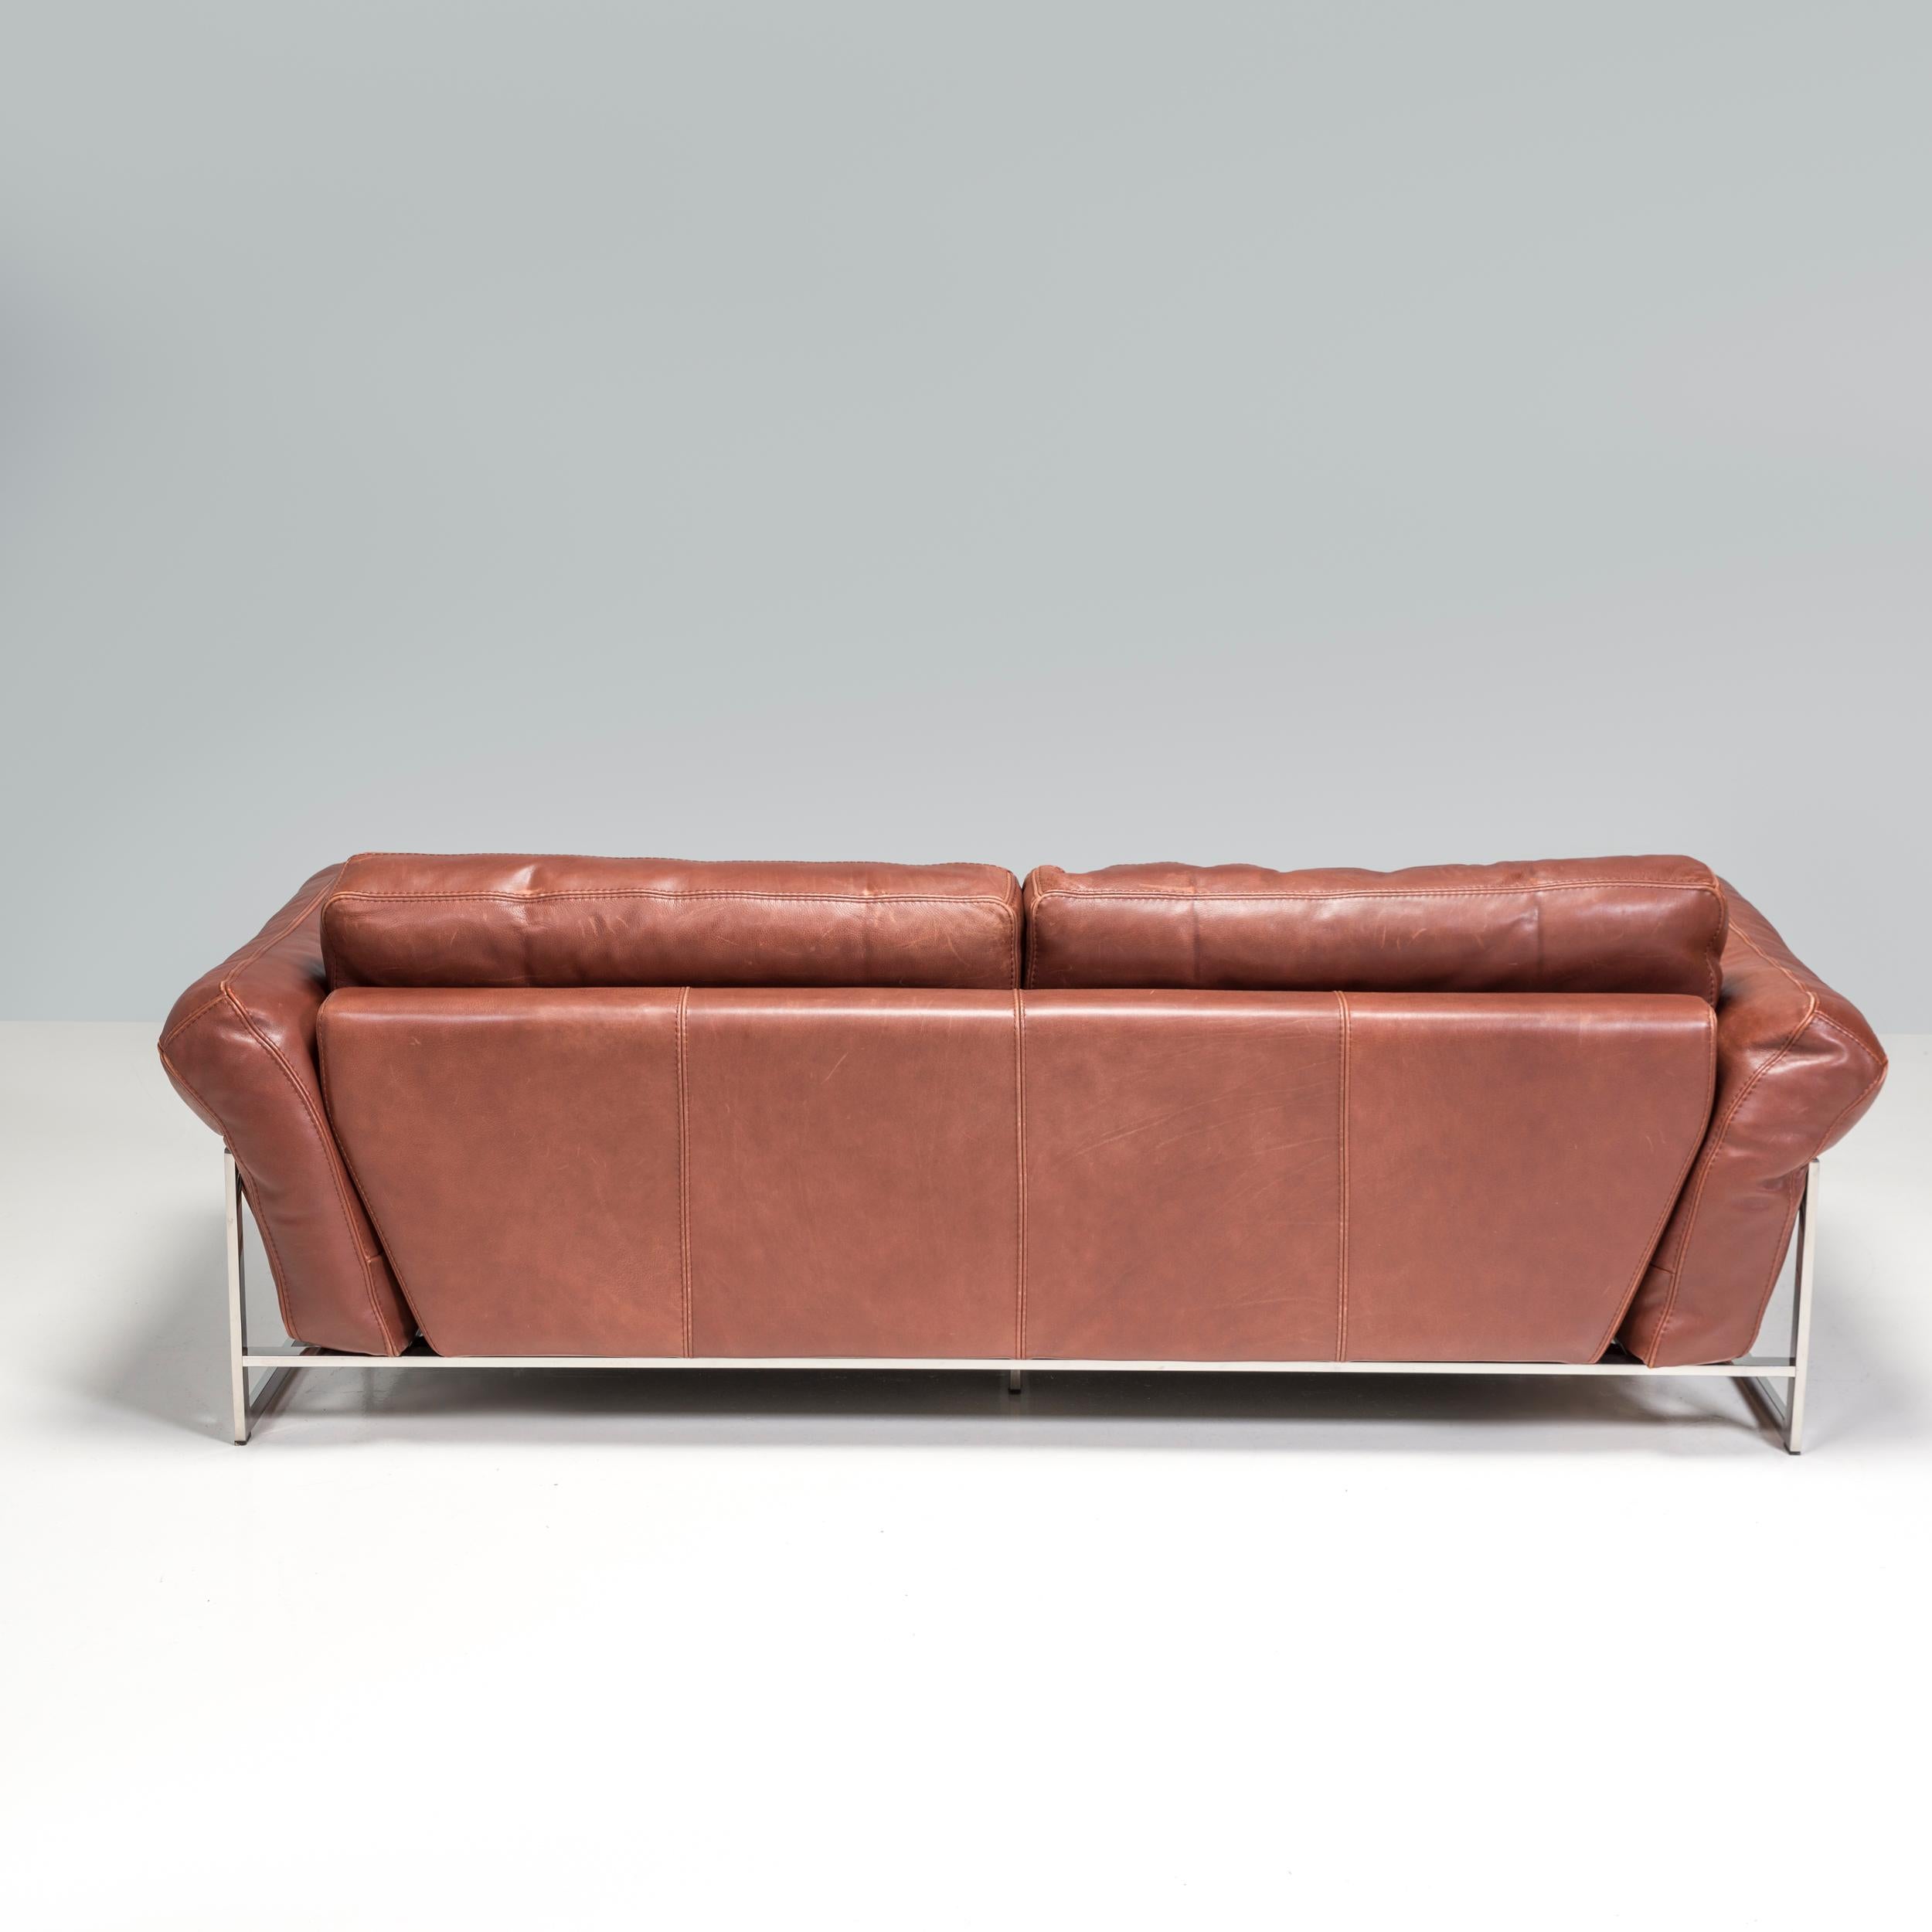 Roche Bobois Brown Leather Sofa In Good Condition For Sale In London, GB